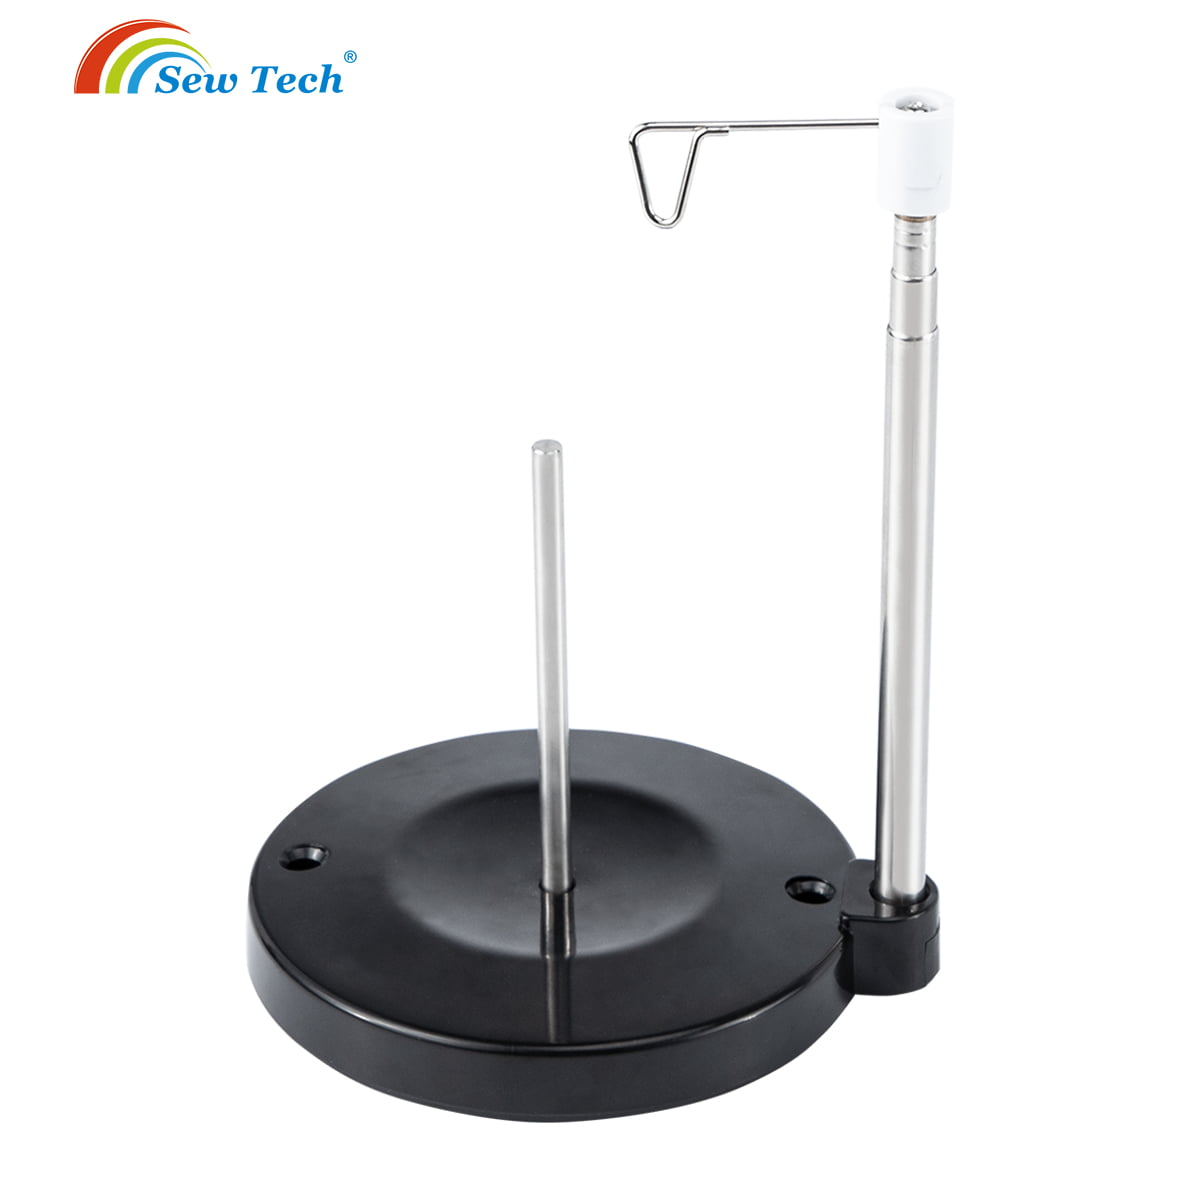 Sew Tech Adjustable Sewing Thread Holder Stand Single Cone large Spool  Stand for Embroidery machine Quilting Knitting Line Rack